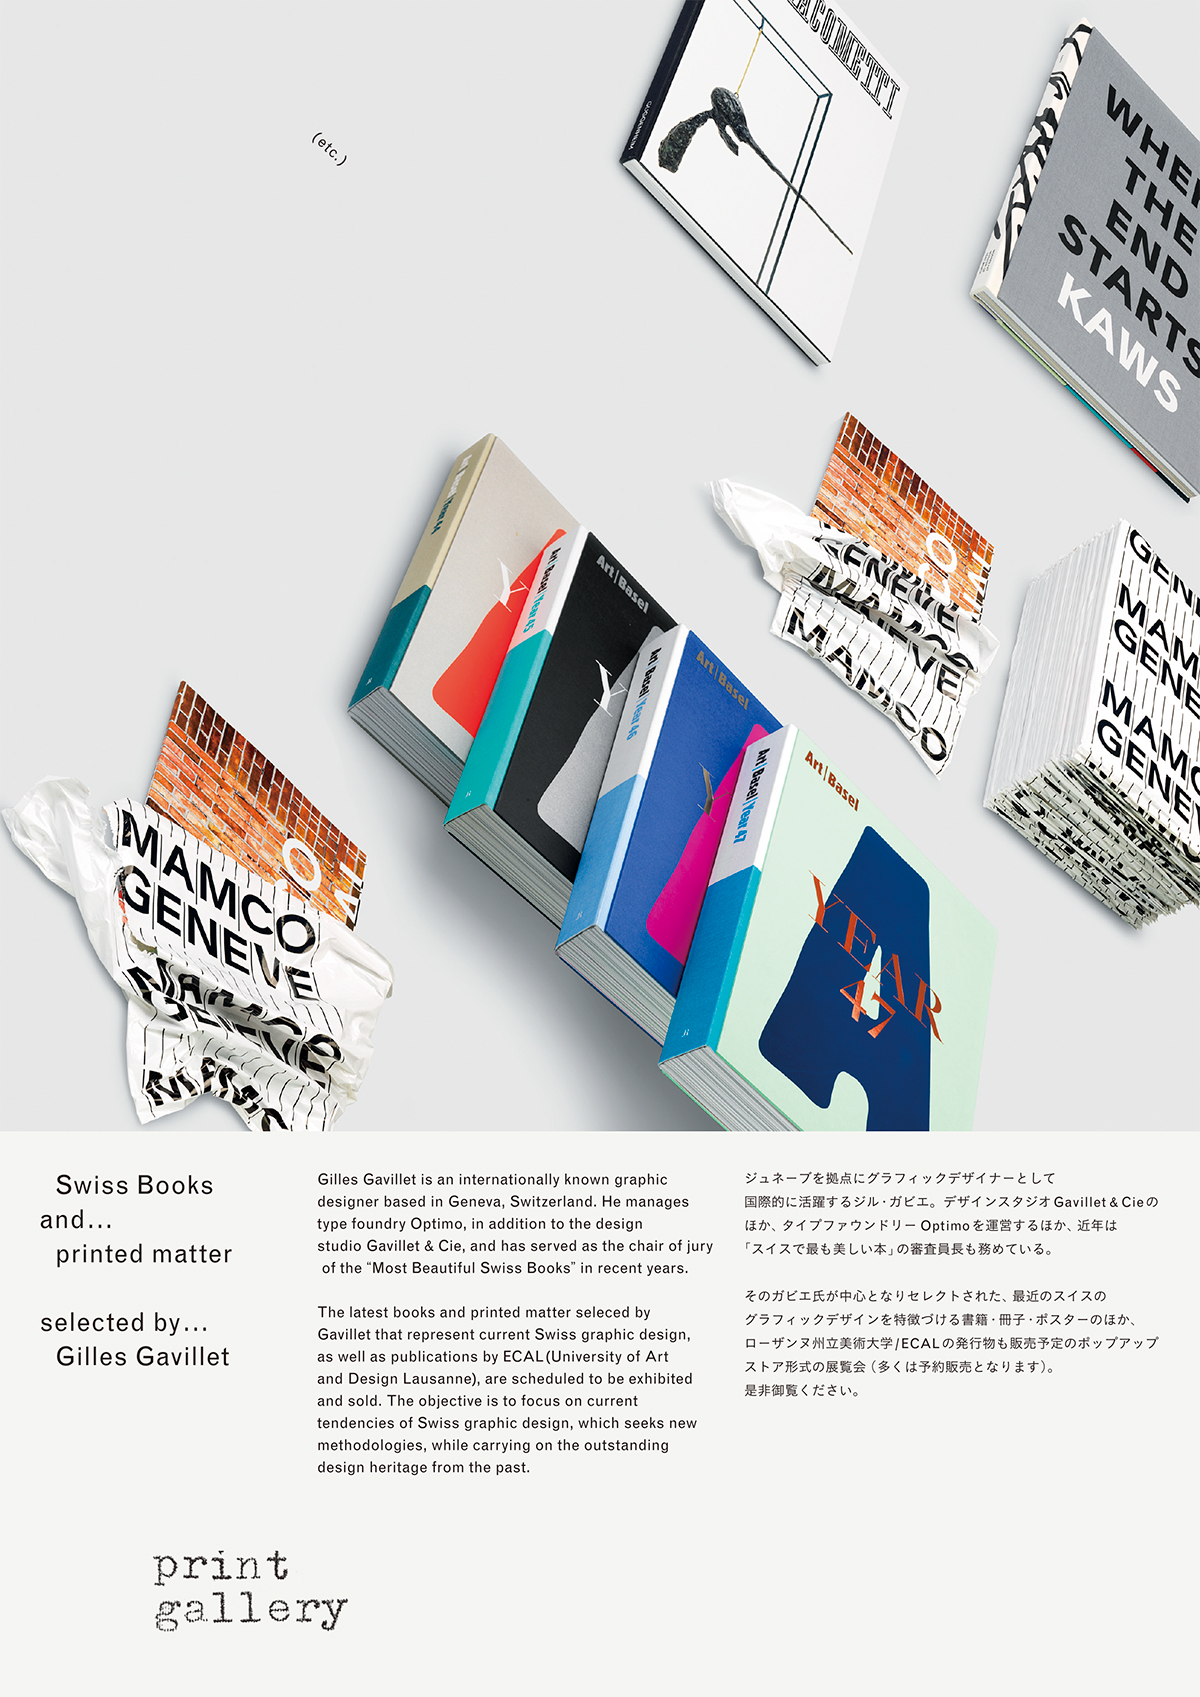 print gallery フライヤー：Swiss Books and printed matter selected by Gilles Gavillet